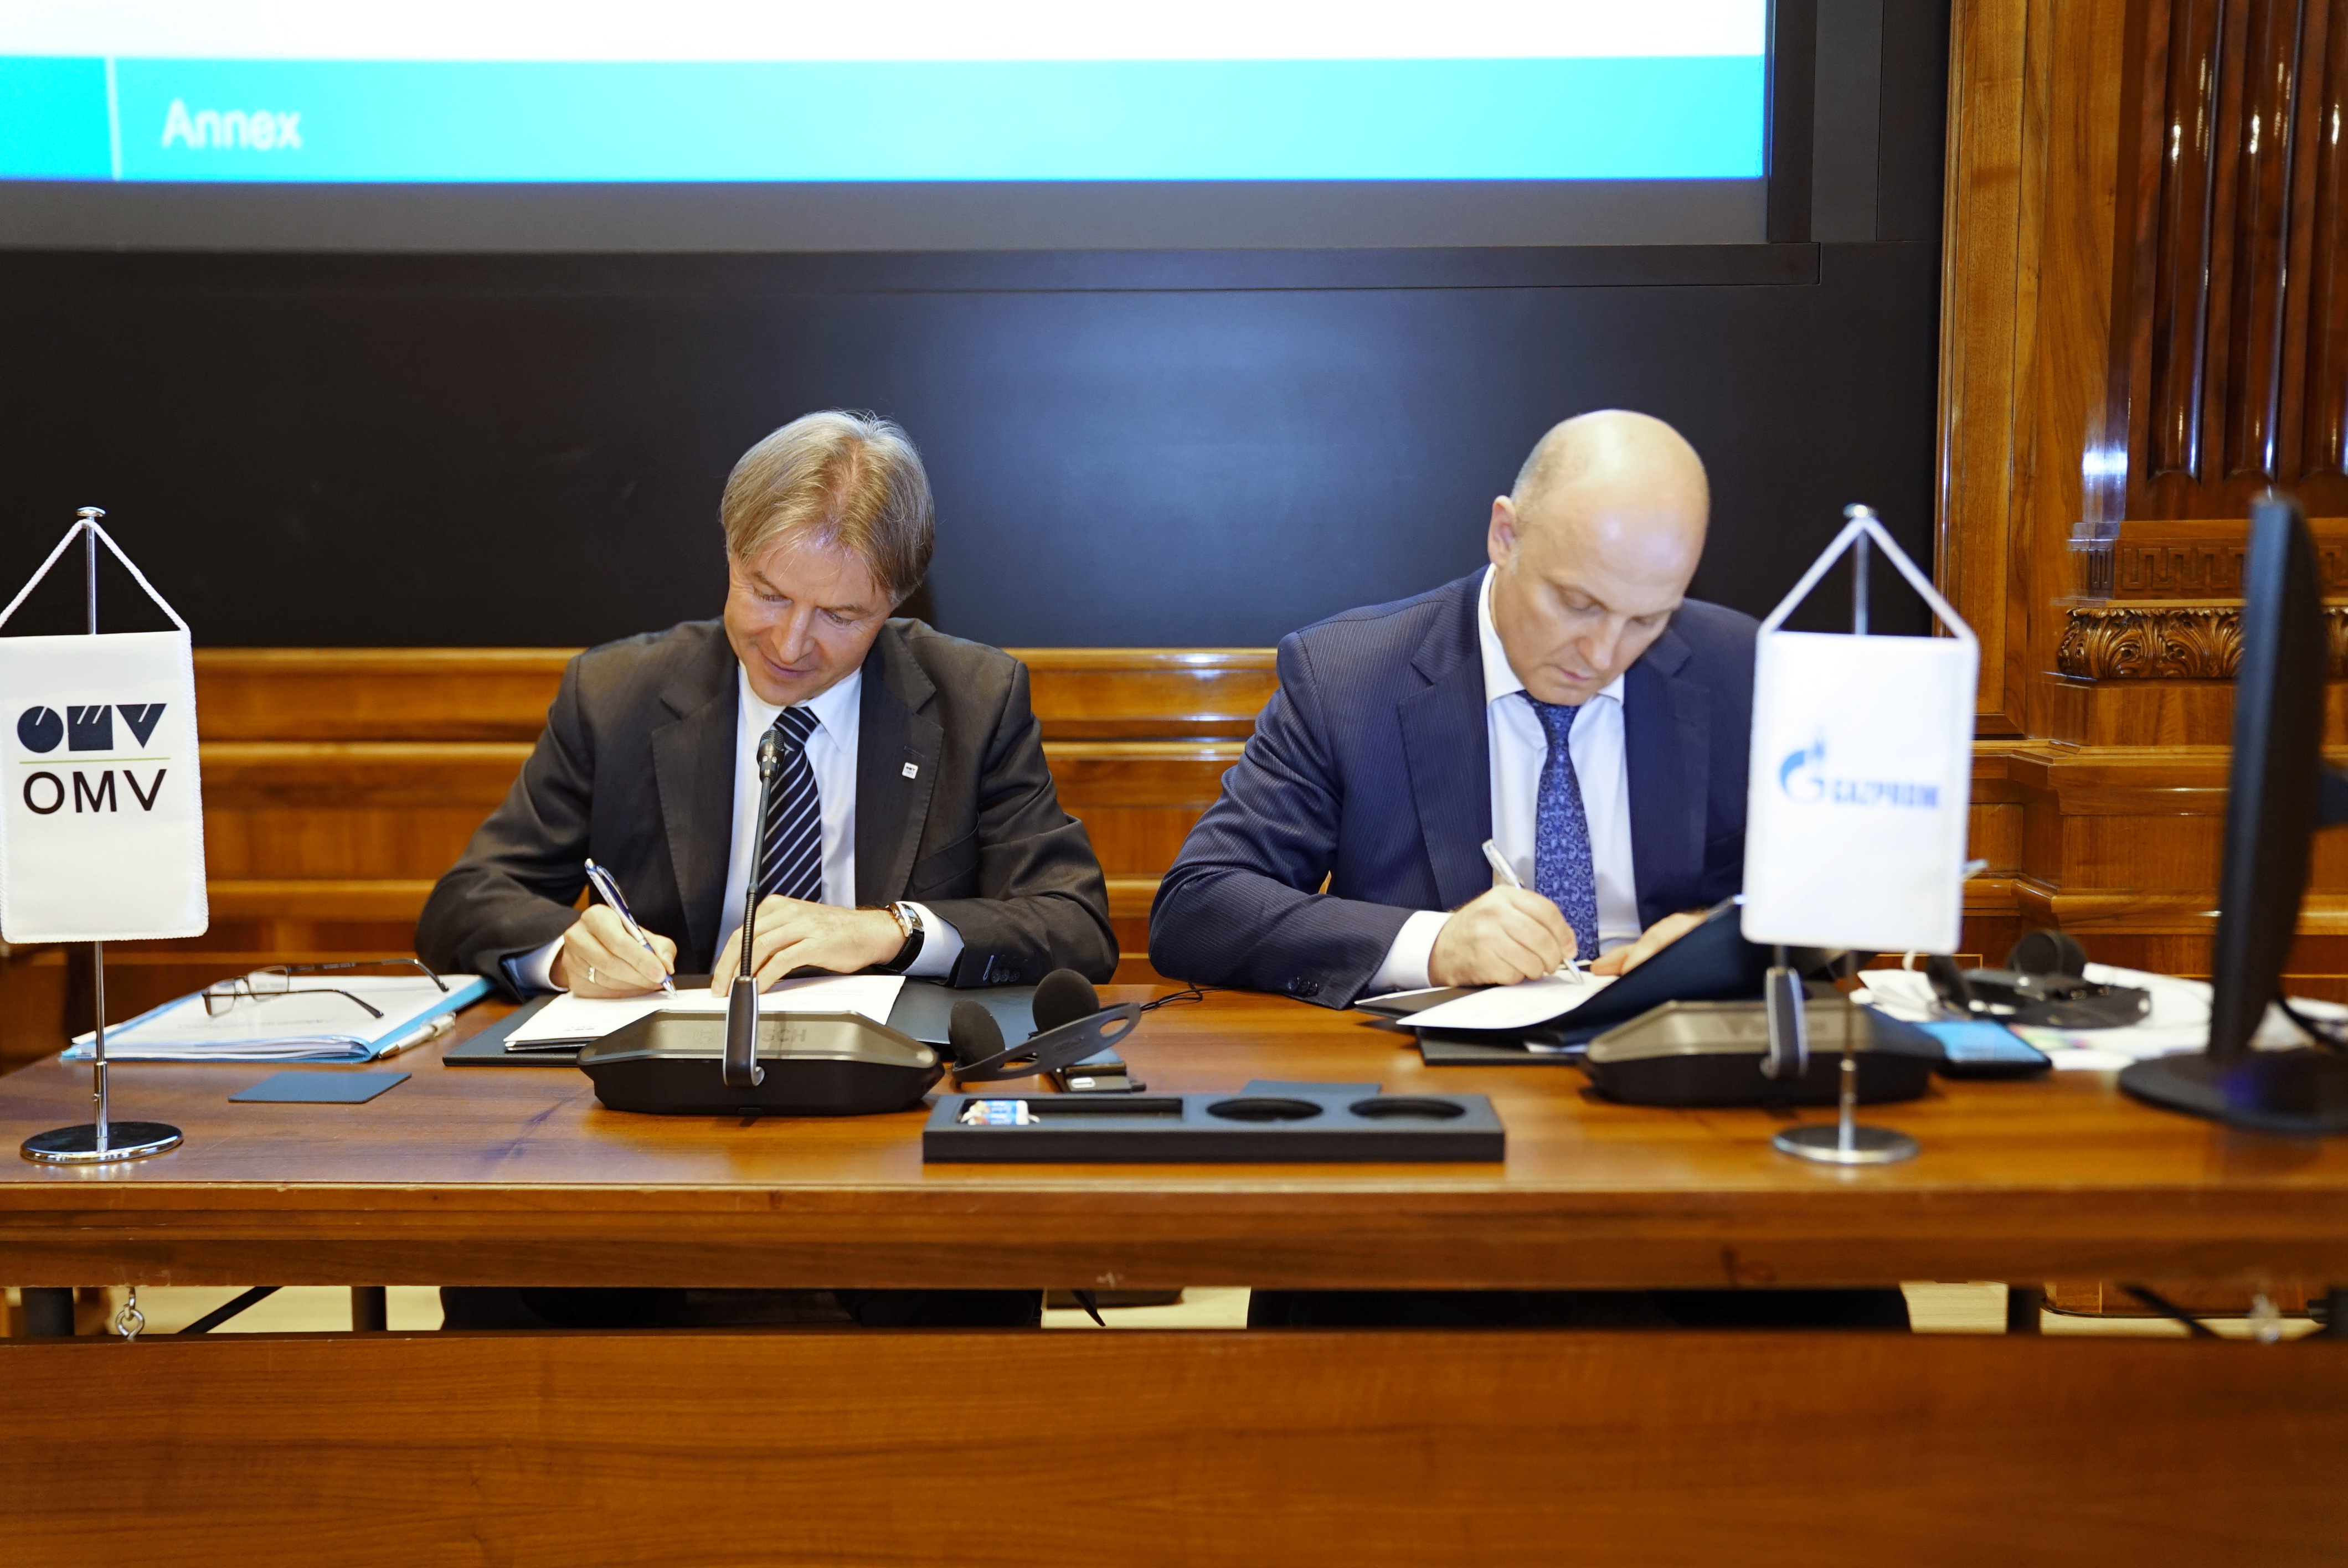 Gazprom and OMV enhancing sci-tech cooperation